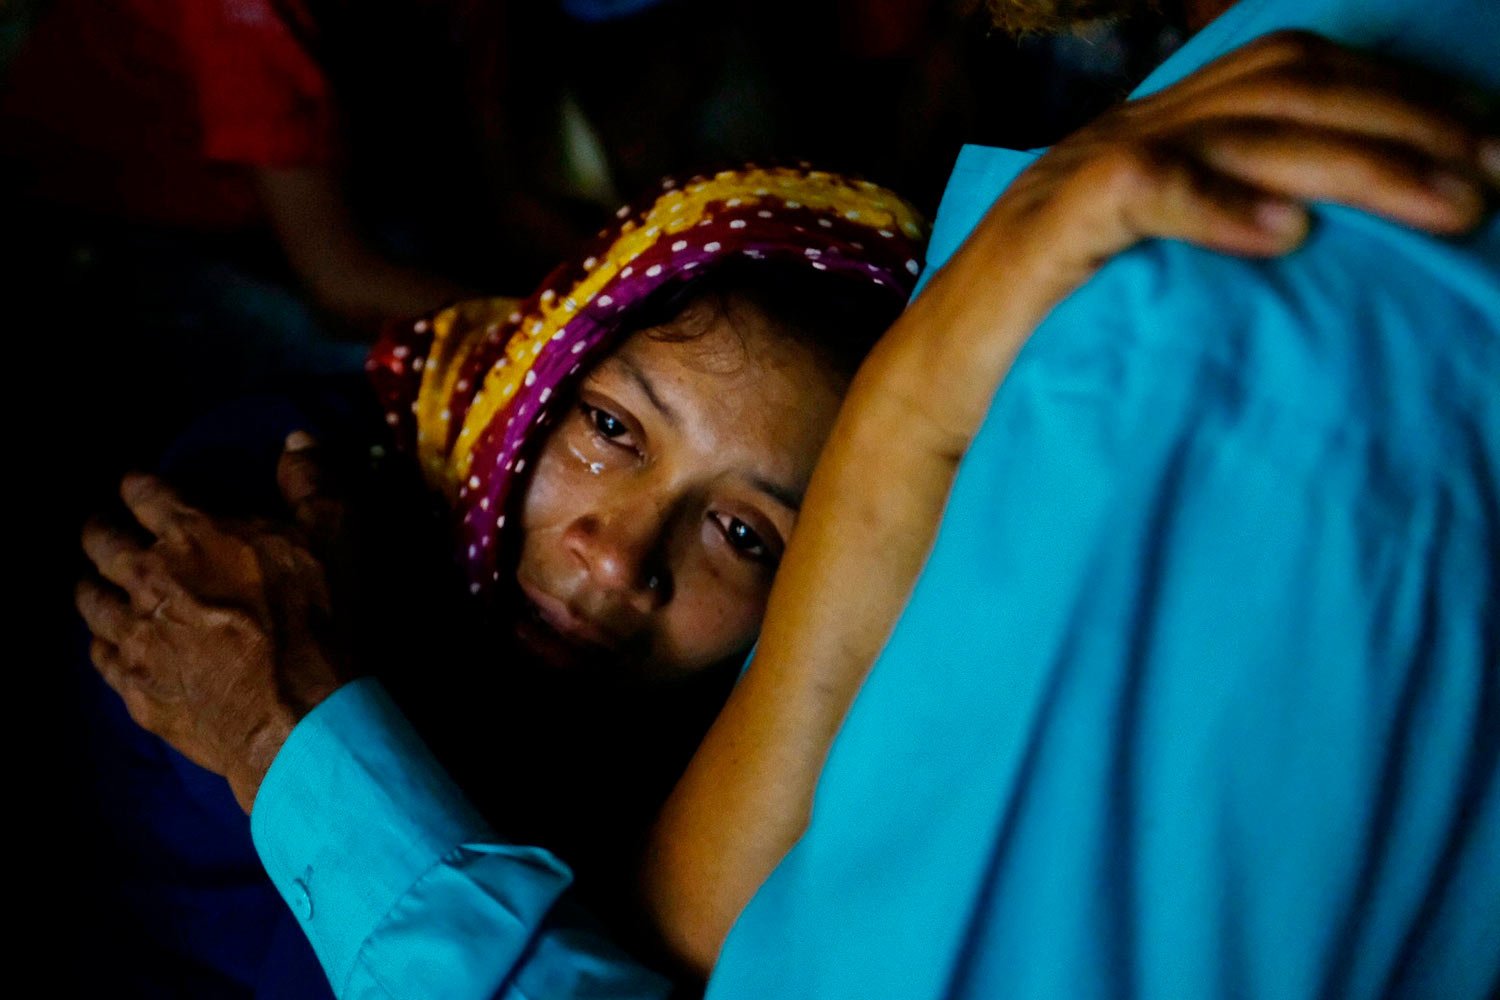  A relative mourns as rescuers try to recover bodies after a cargo vessel hit a ferry carrying dozens of people in Narayanganj, outside Dhaka, Bangladesh, Sunday, March 20, 2022. (AP Photo/Mahmud Hossain Opu) 